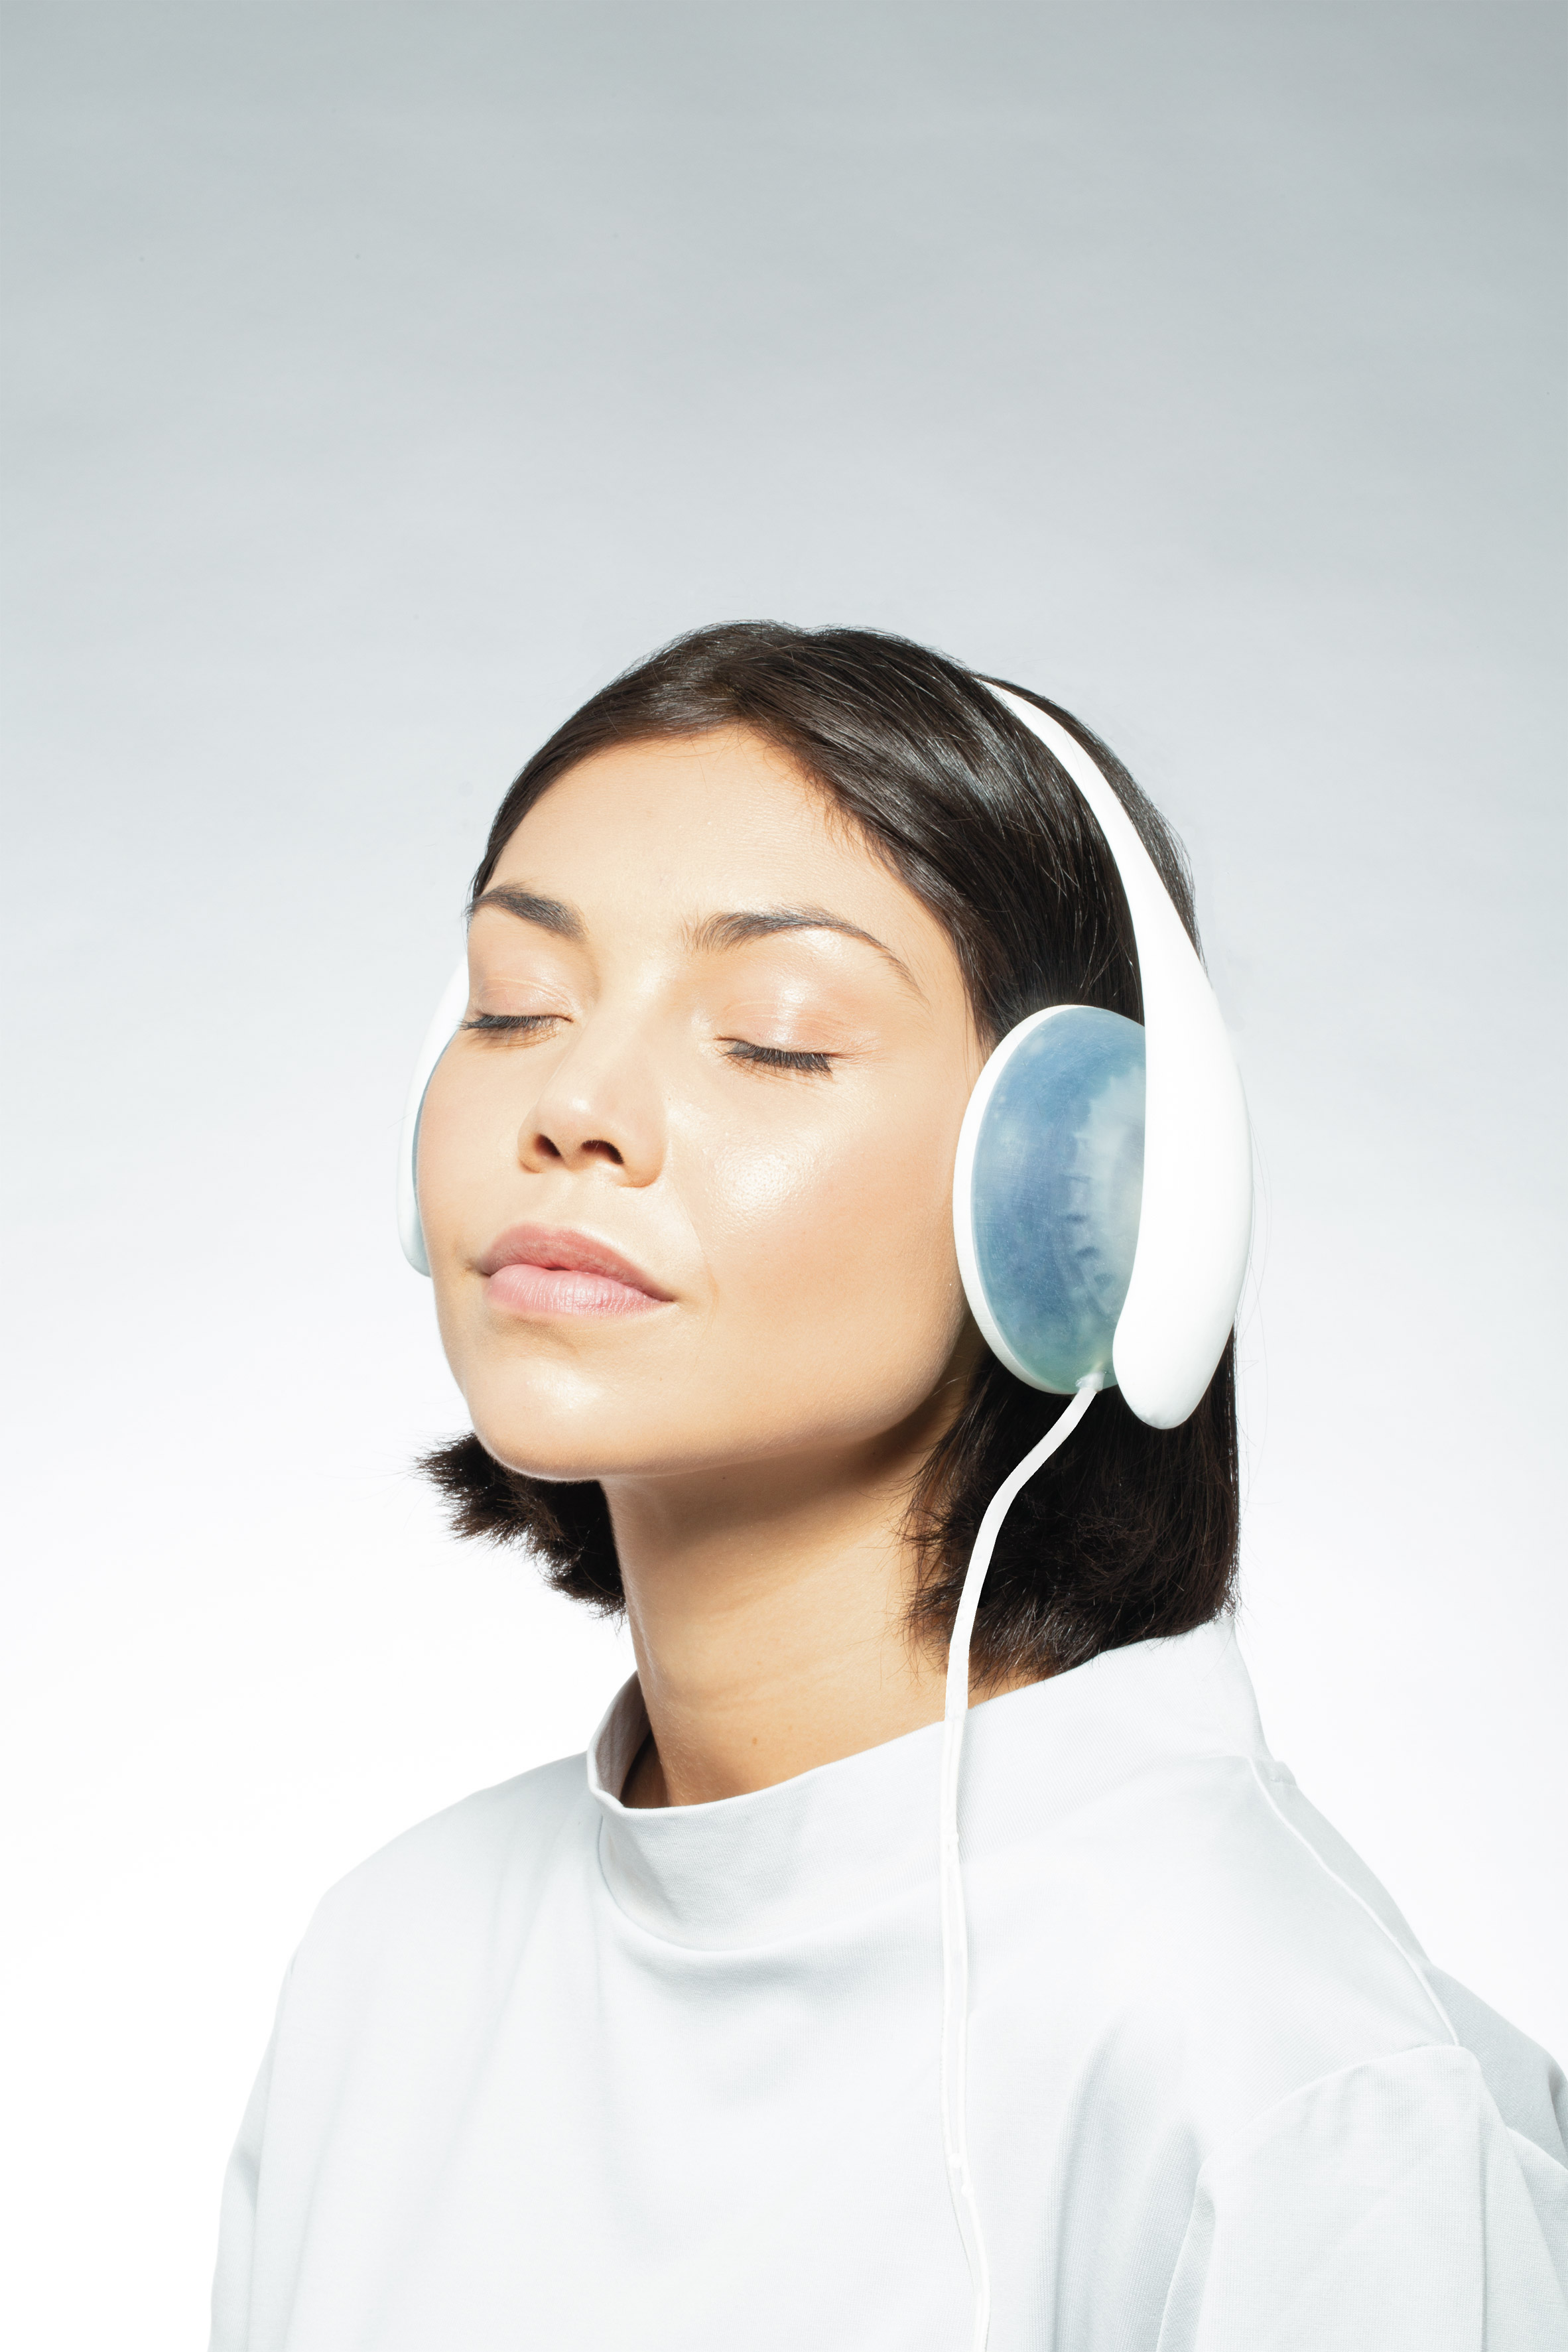 Water-filled Inmergo headphones by Rocco Giovannoni allow immersive listening